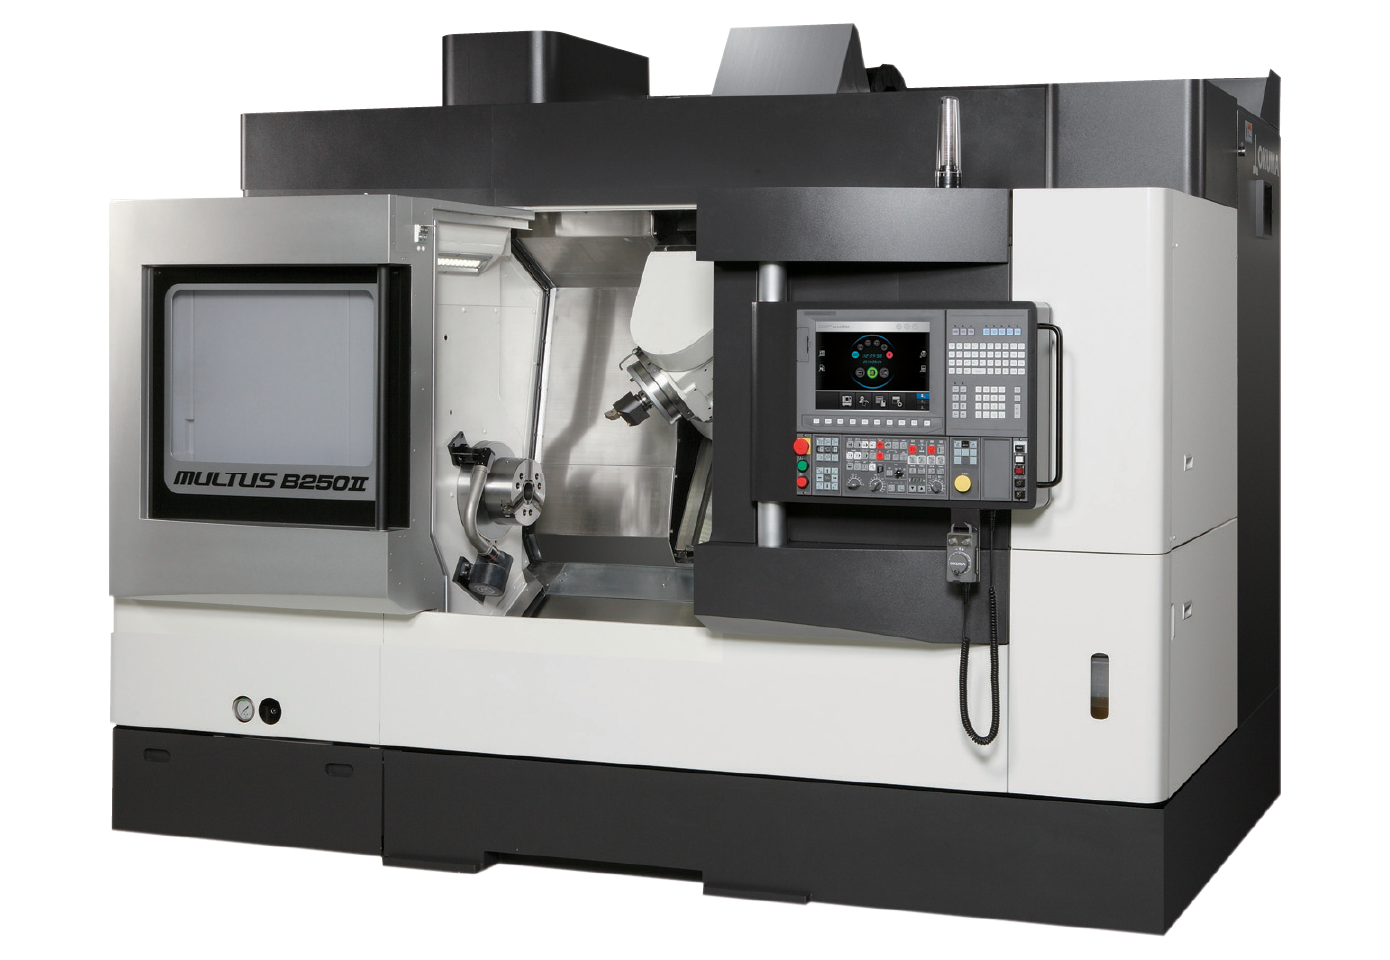 Some multitasking lathes come equipped with a lower turret for increased flexibility and shorter cycle times, as shown on the MULTUS B250II from Okuma. (Image courtesy of Okuma America)